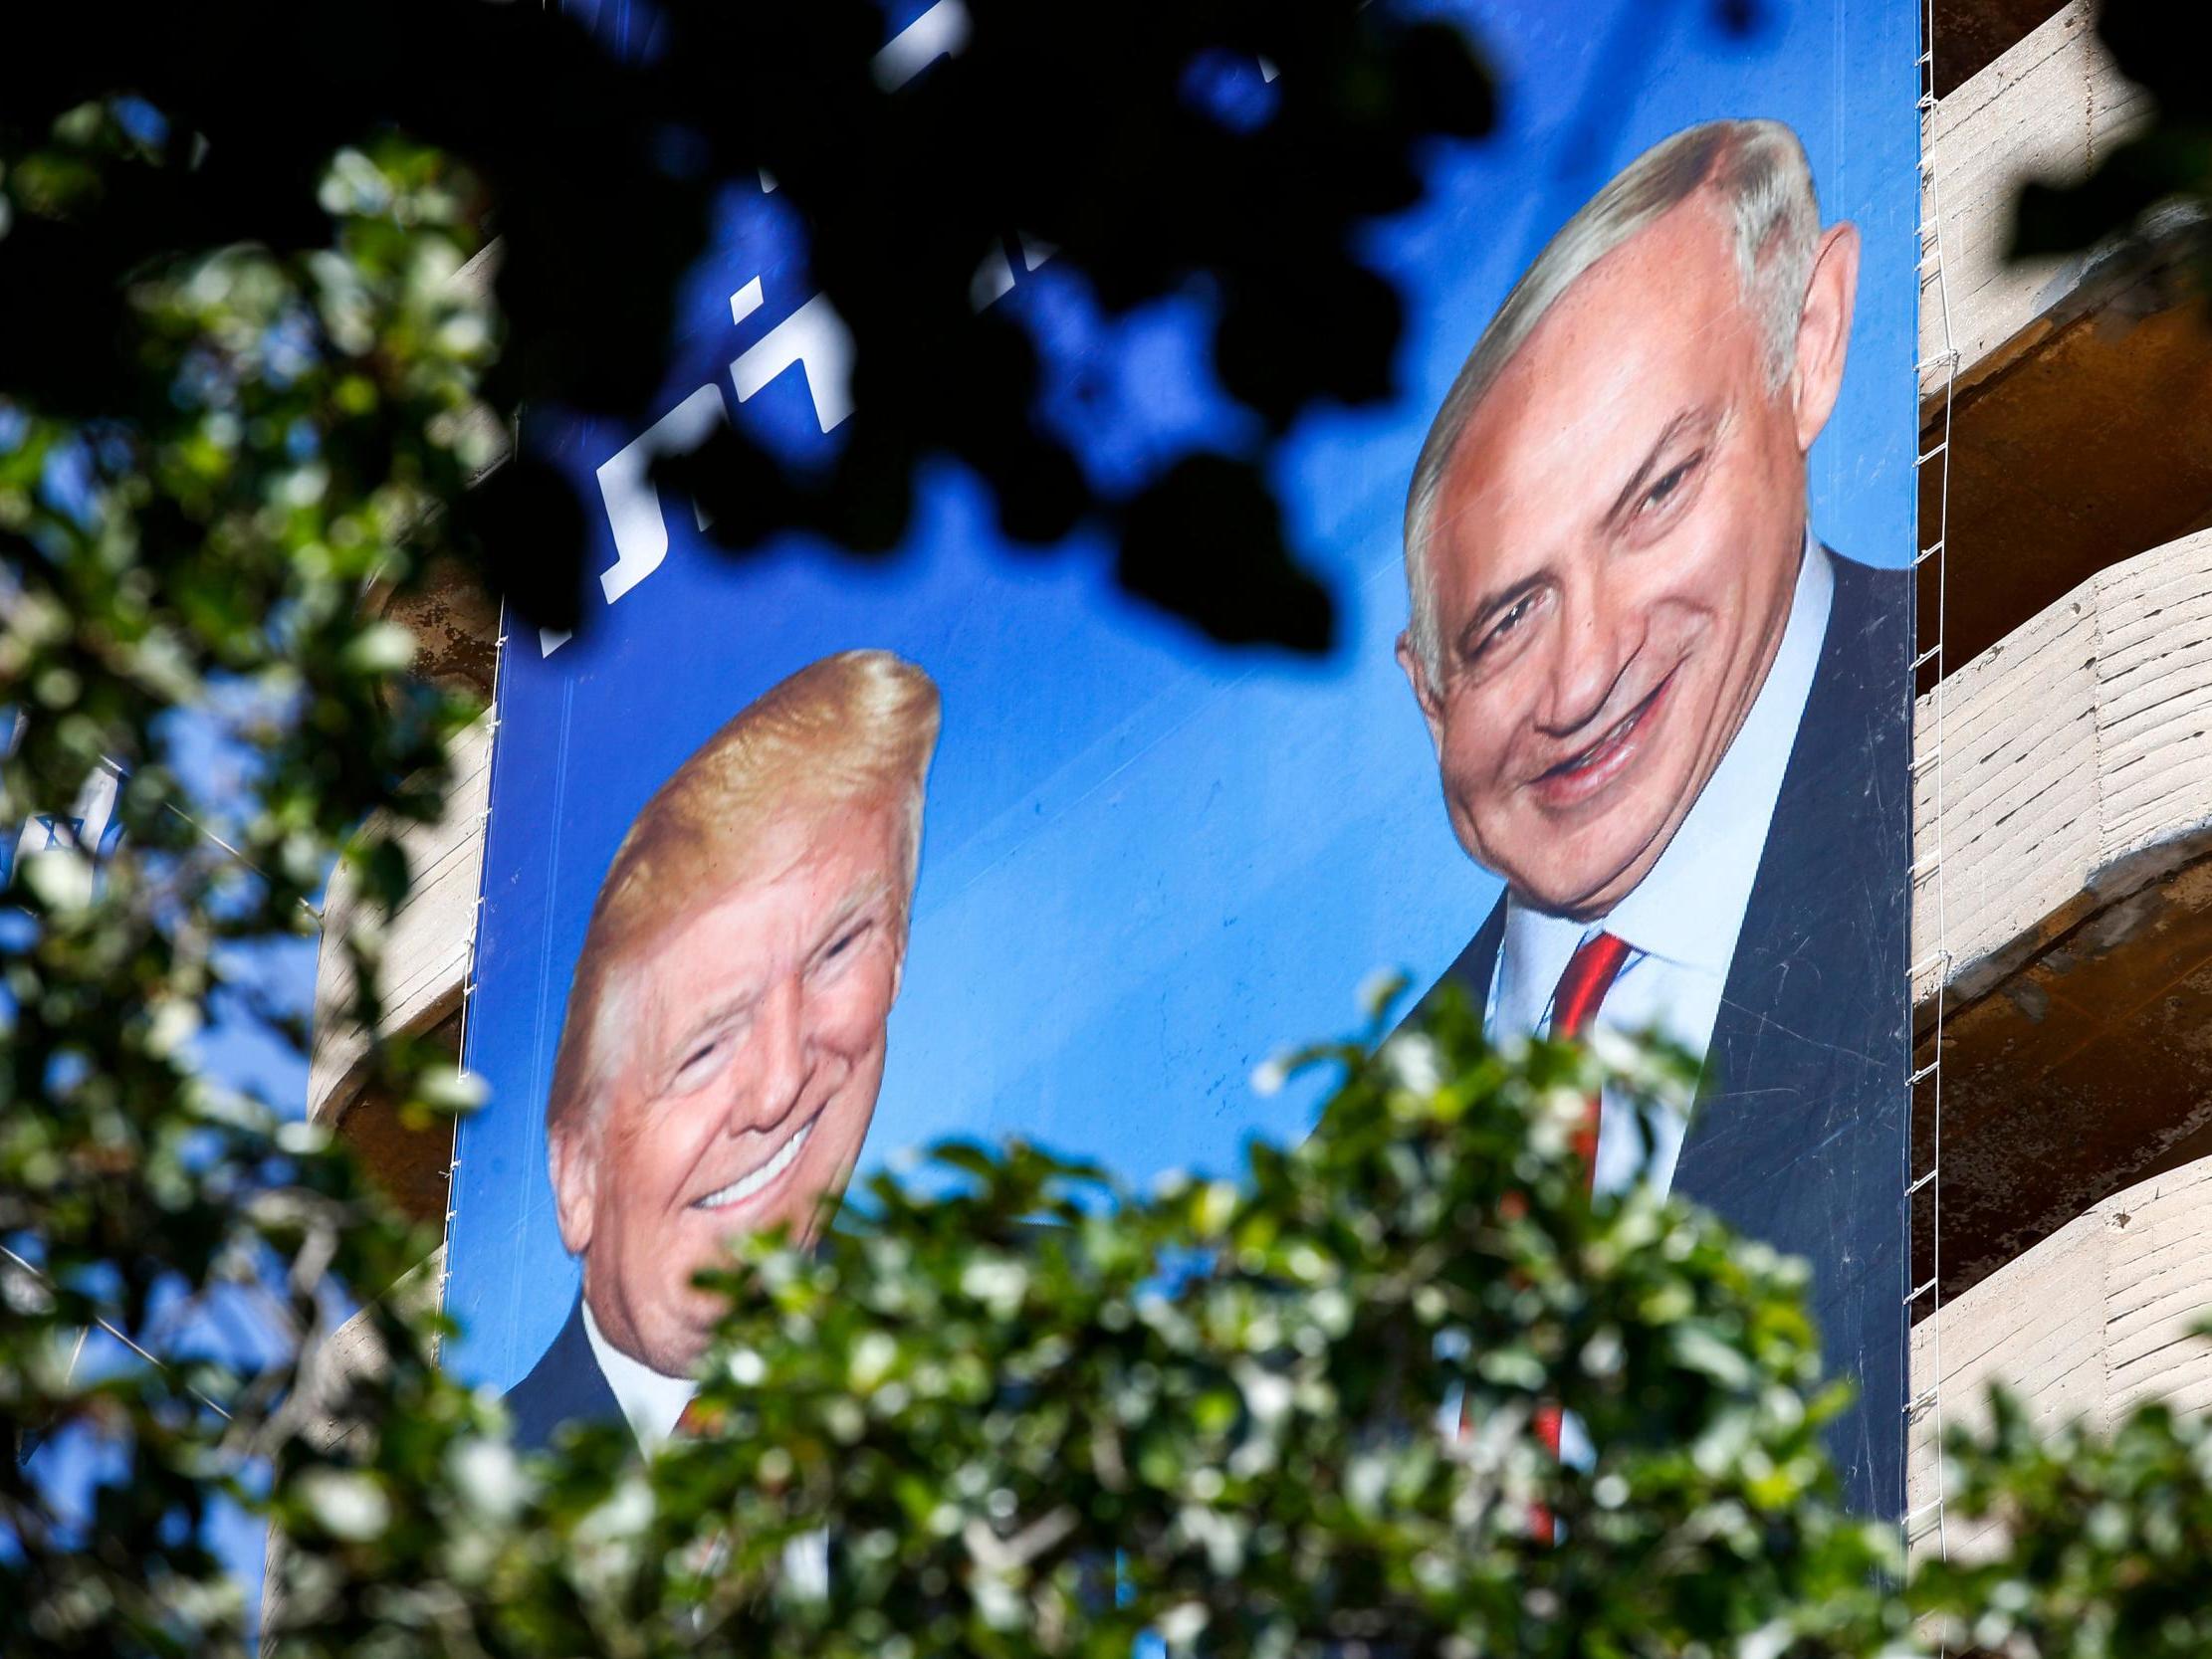 Two giant Israeli Likud Party election banners hanging from a building in Tel Aviv show Israeli Prime Minister Benjamin Netanyahu shaking hands with US President Donald Trump, 28 July 2019